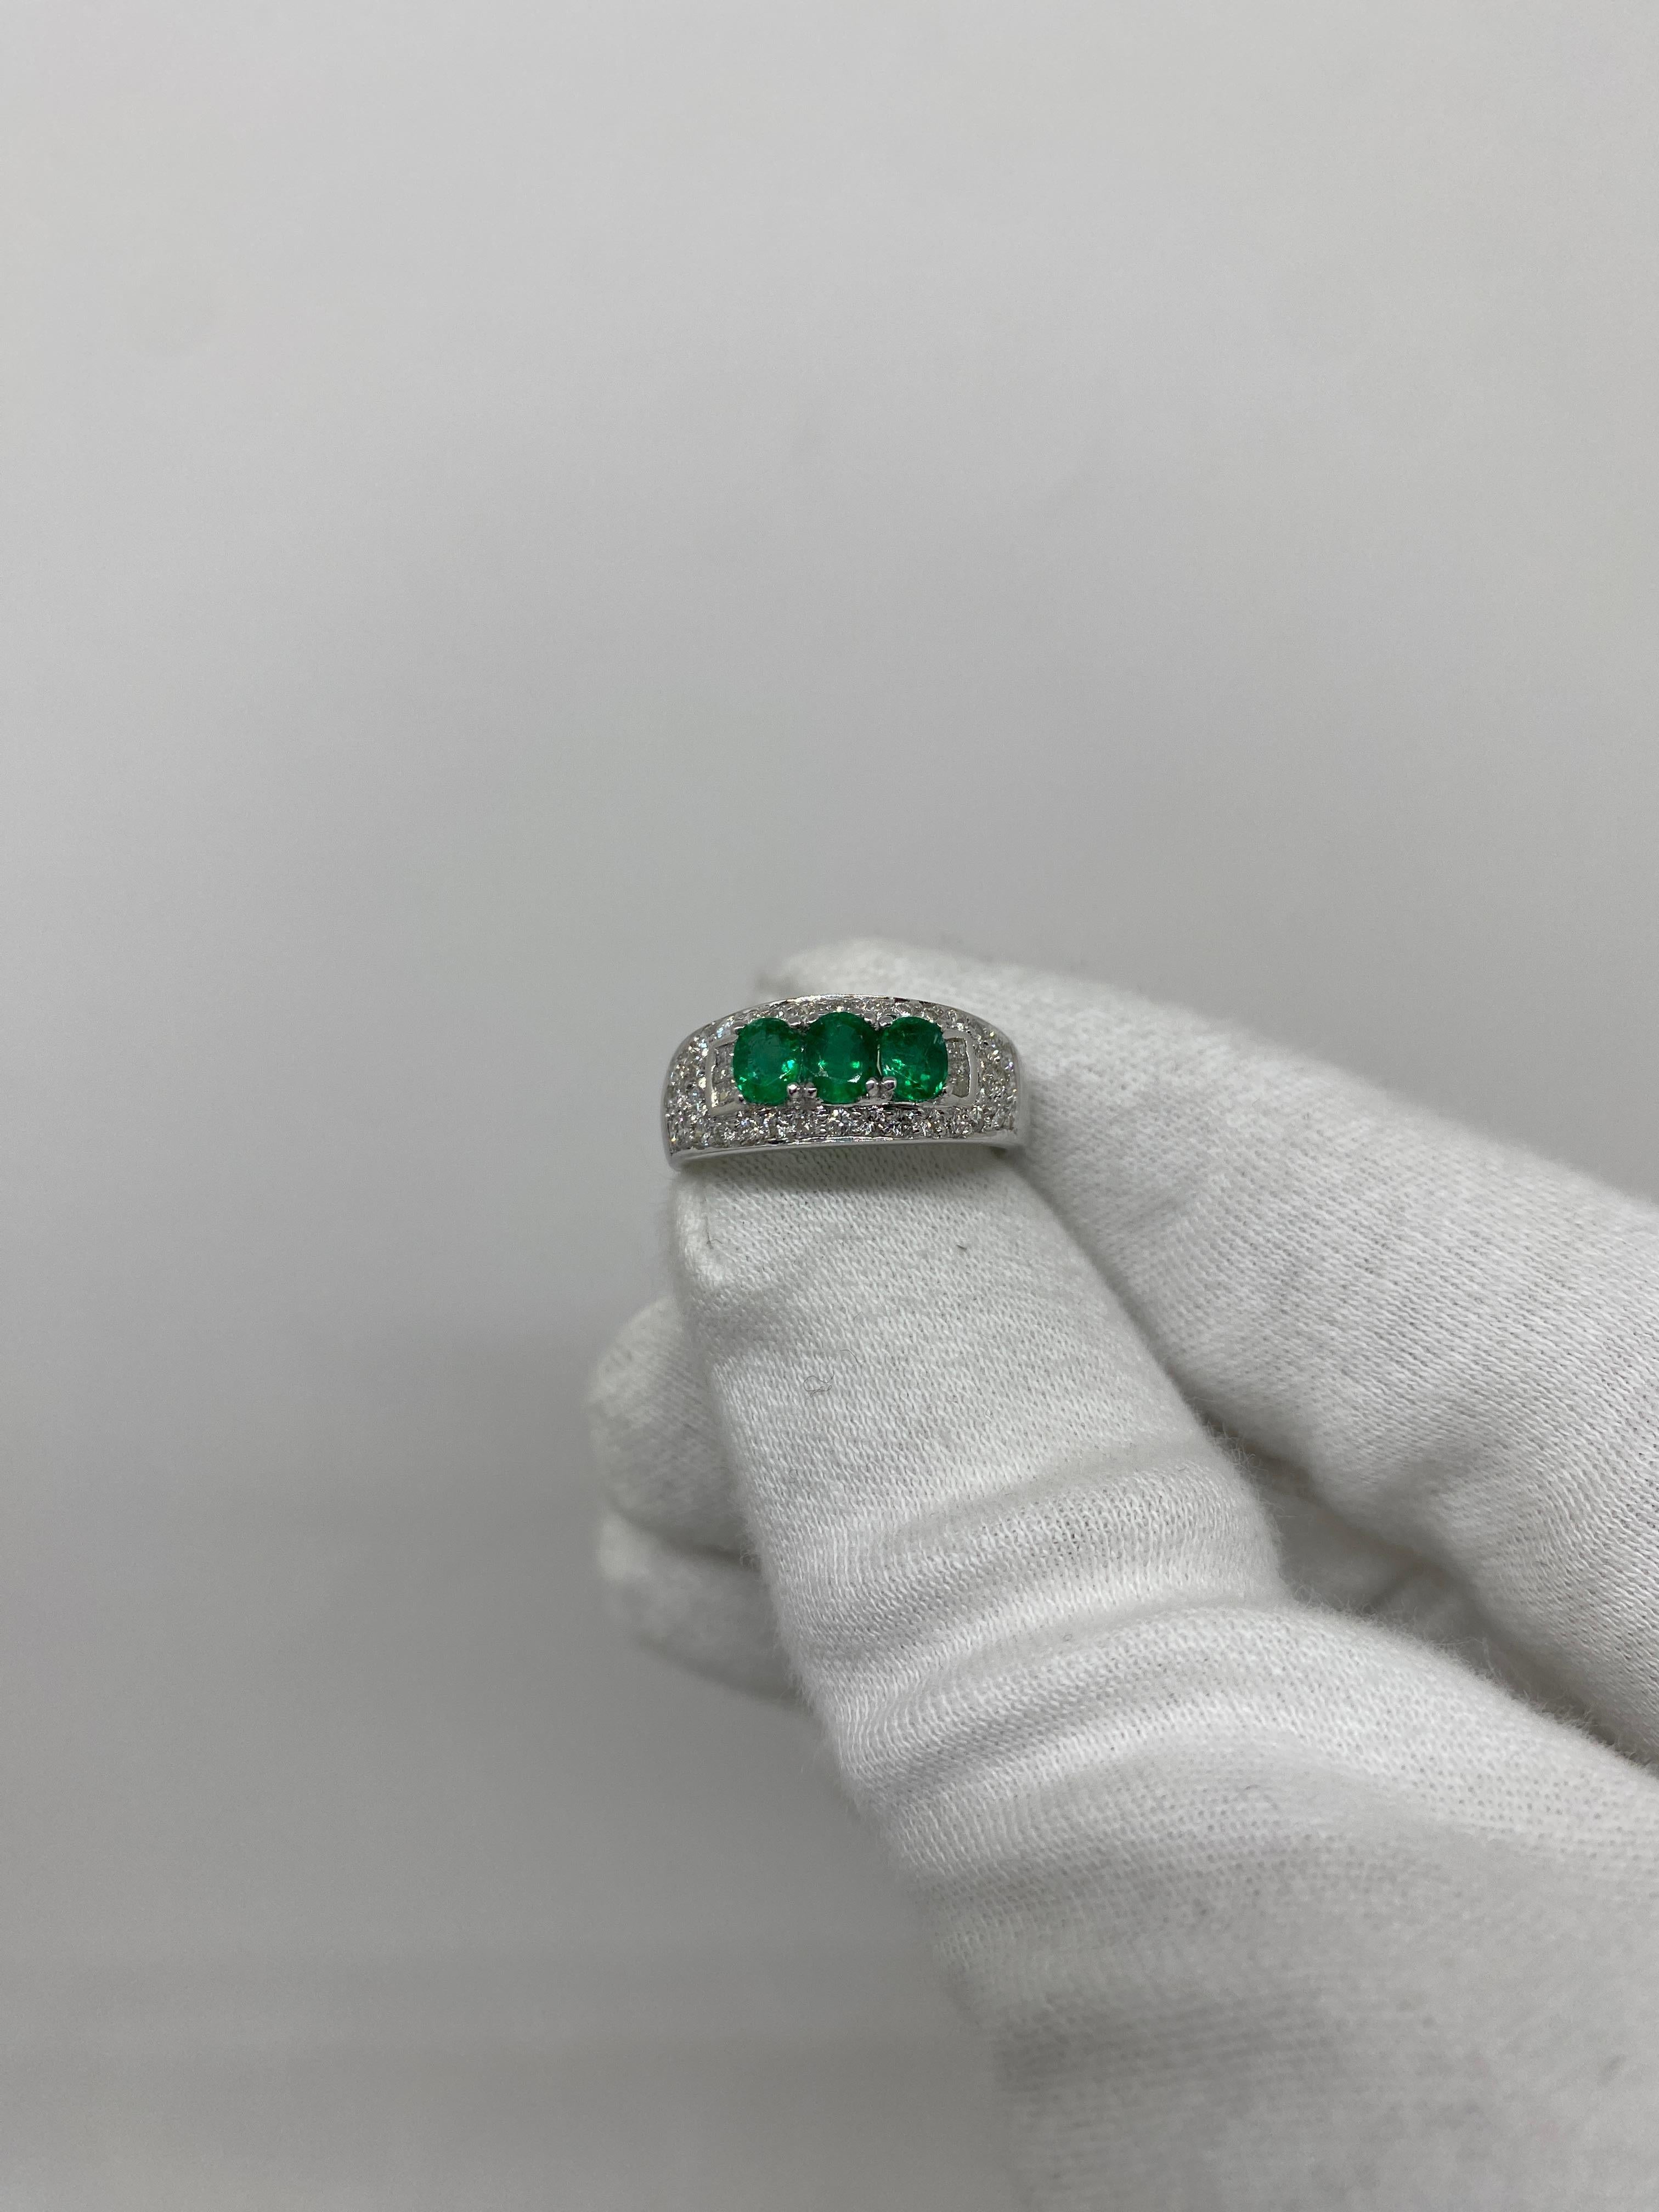 18 kt yellow gold 18 kt rhodium-plated band ring paved with natural white brilliant-cut diamonds and three natural navette-cut emeralds

Welcome to our jewelry collection, where every piece tells a story of timeless elegance and unparalleled